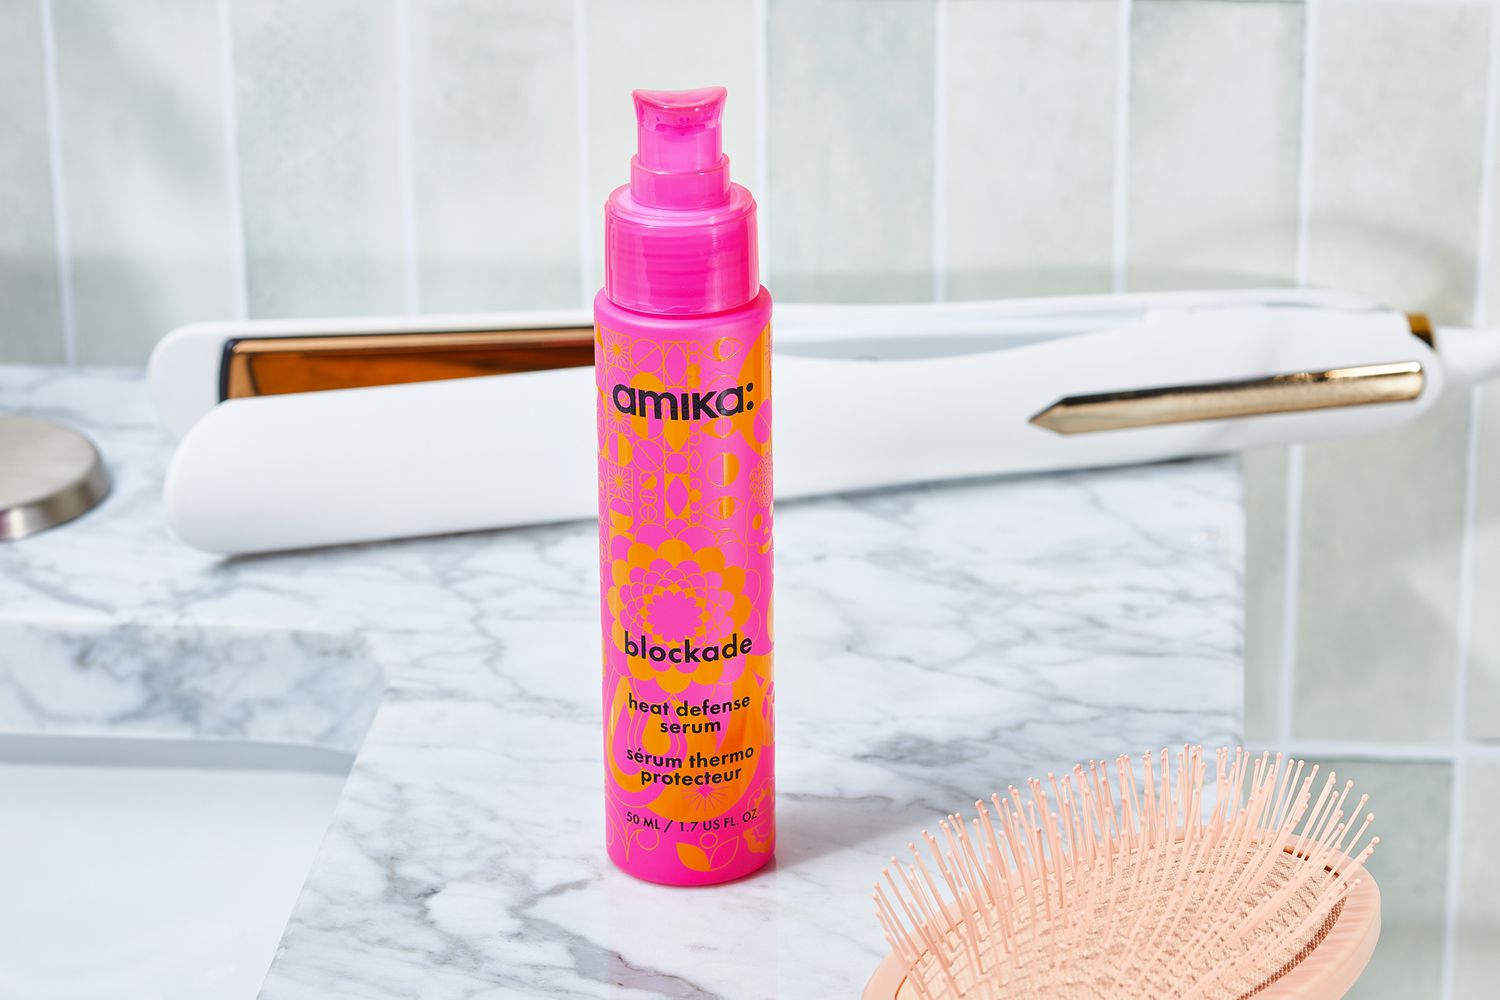 Amika Blockade Heat Defense Serum bottle sits on bathroom counter with hair styling tools